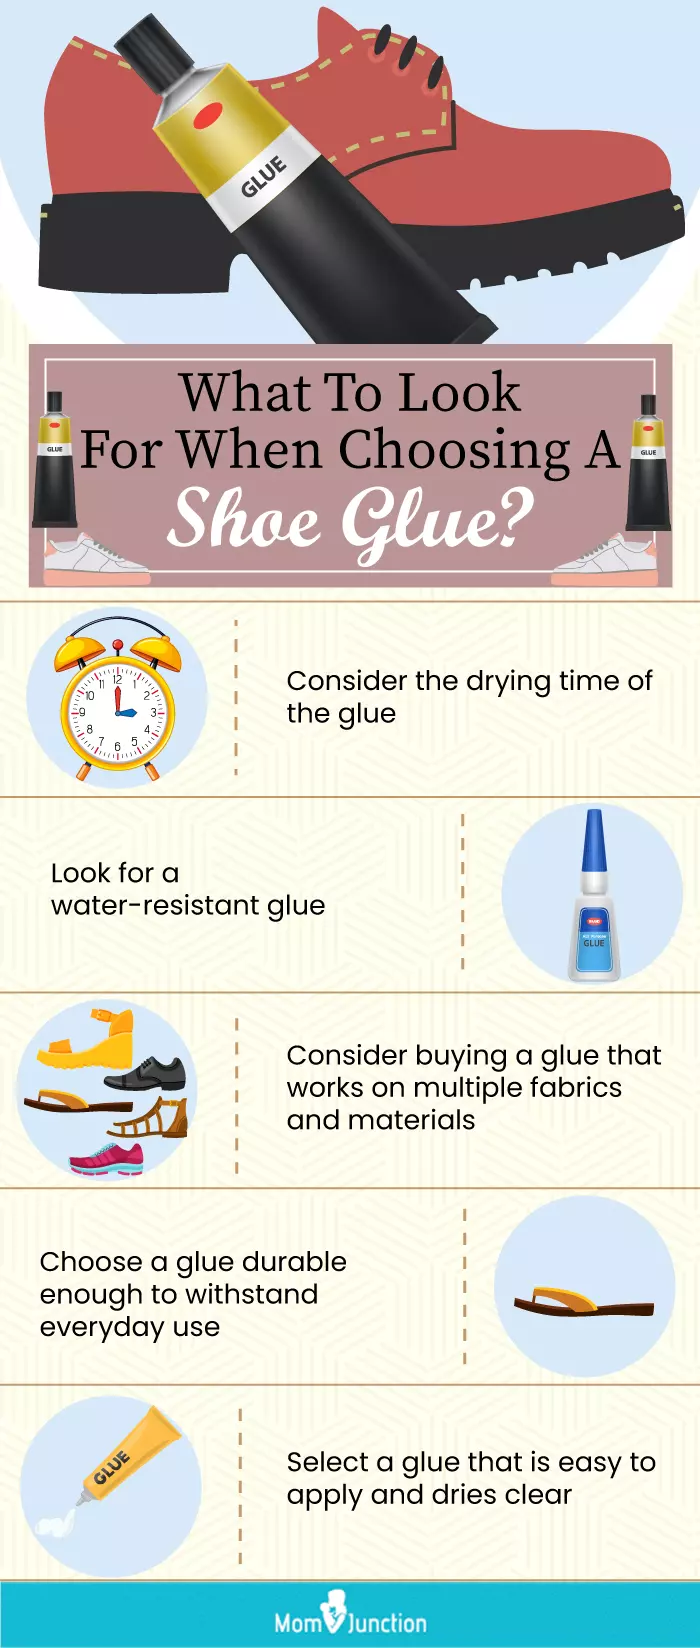 What To Look For When Choosing A Shoe Glue?